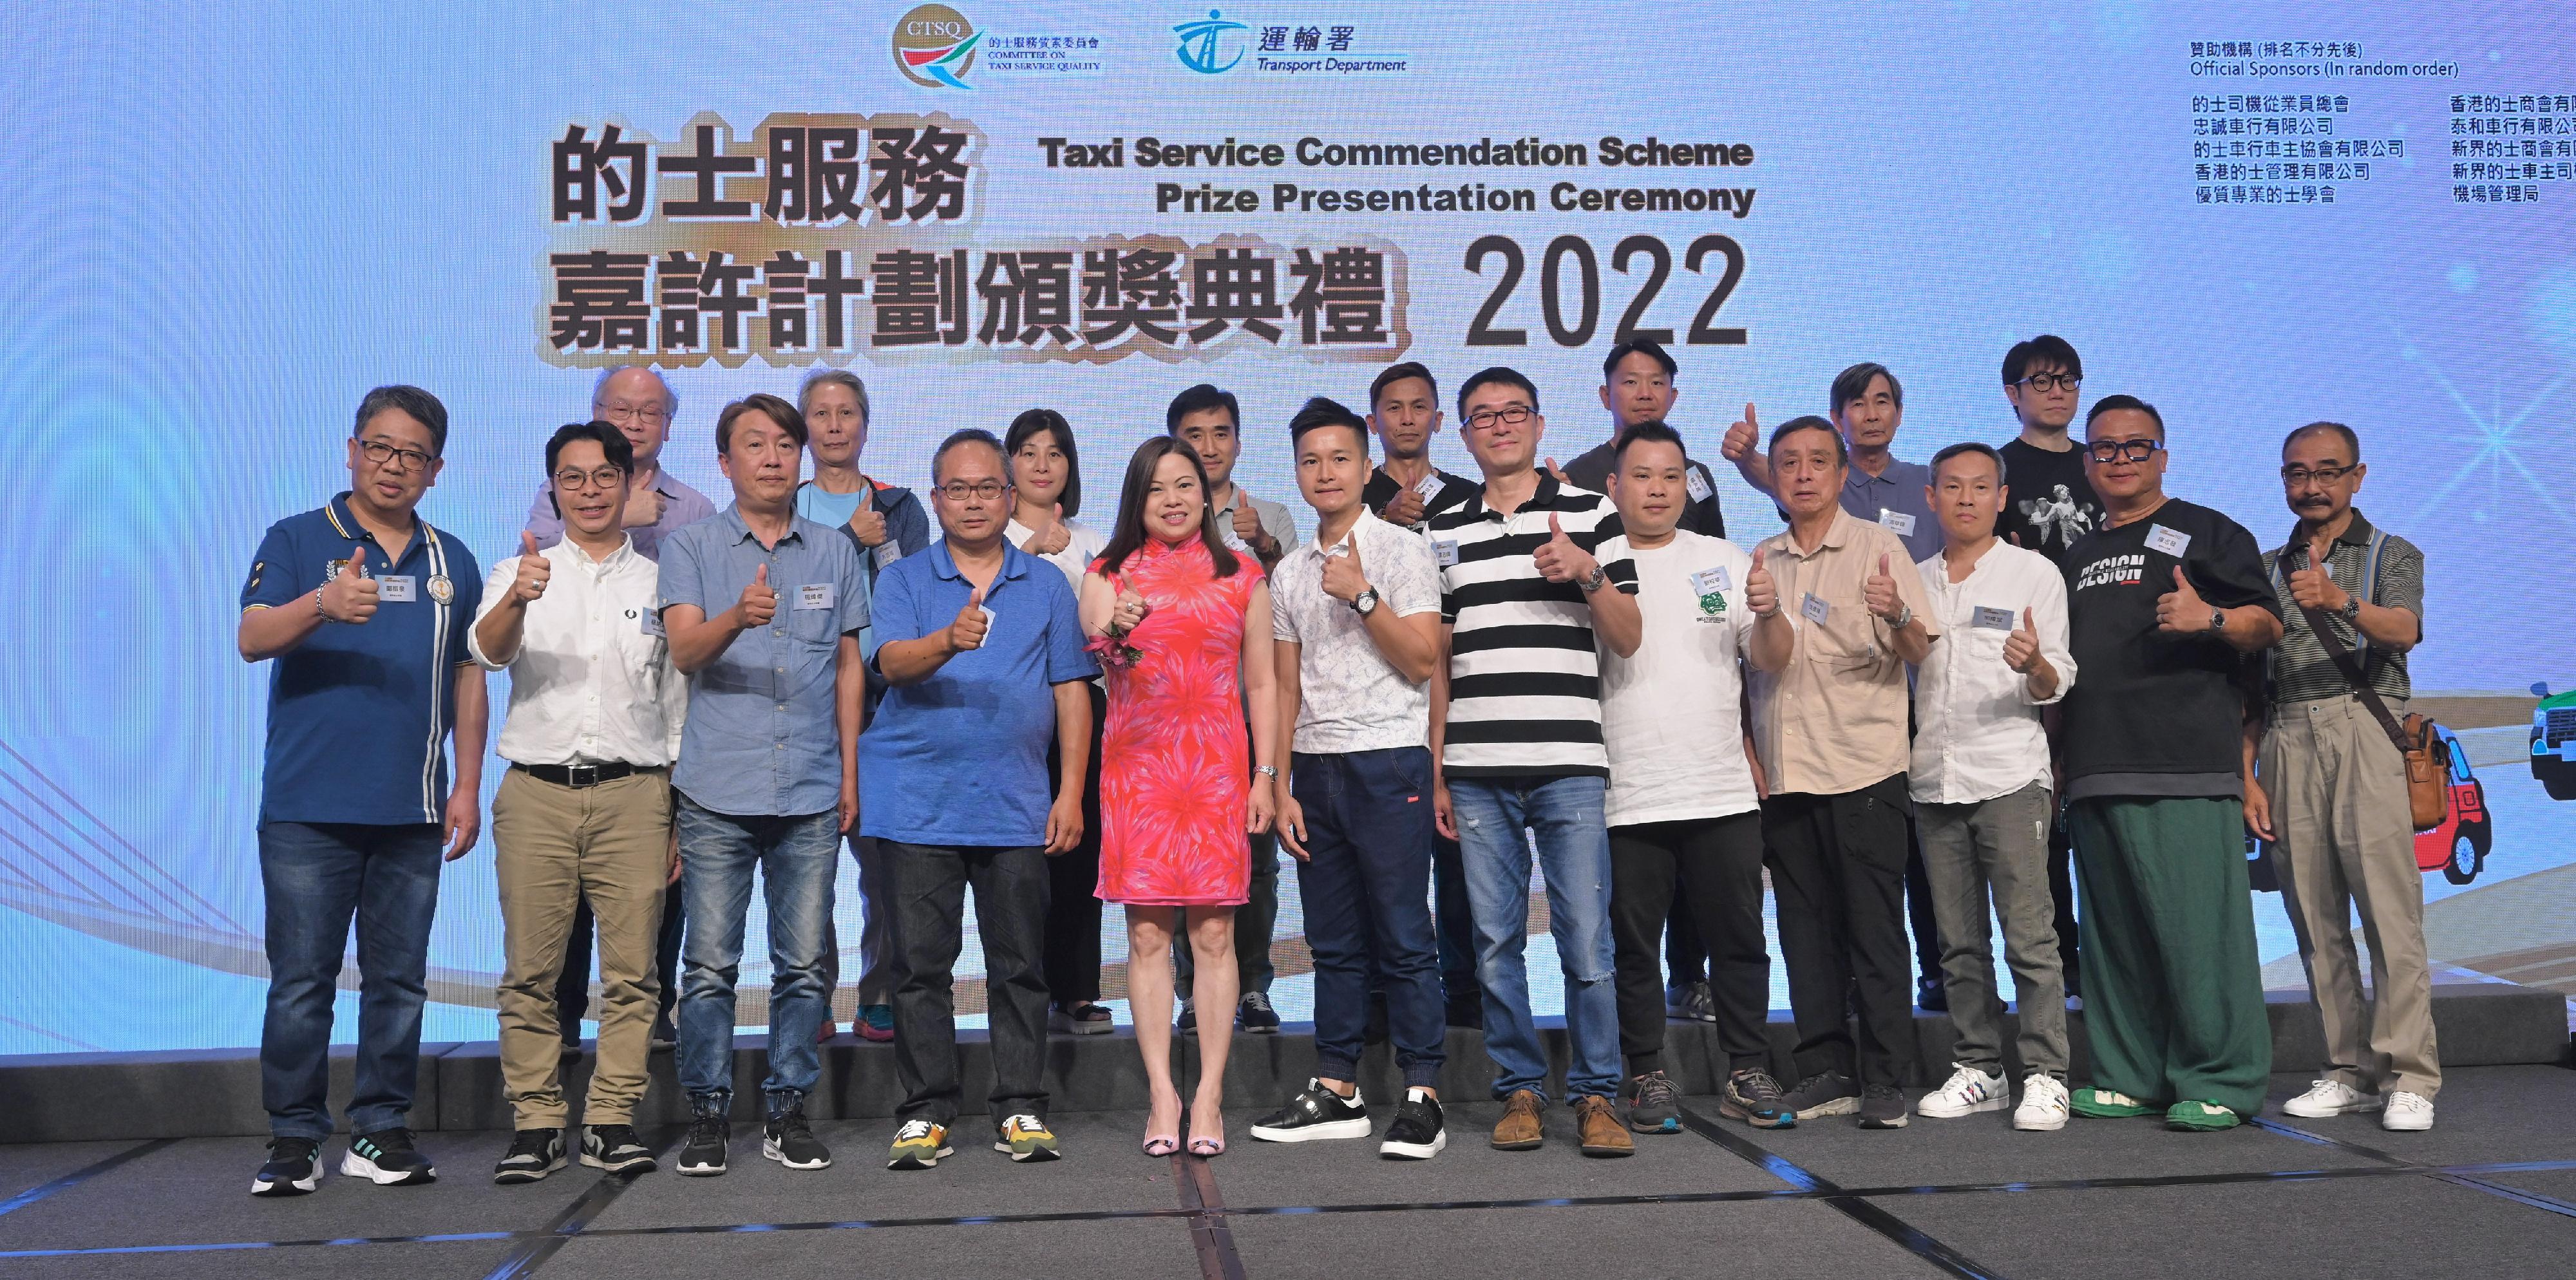 The prize presentation ceremony for the Taxi Service Commendation Scheme 2022, jointly organised by the Committee on Taxi Service Quality (CTSQ) and the Transport Department, was held today (July 14). The CTSQ Chairman and Commissioner for Transport, Miss Rosanna Law (front row, fifth left), is pictured with the awardees of Quality Taxi Drivers.